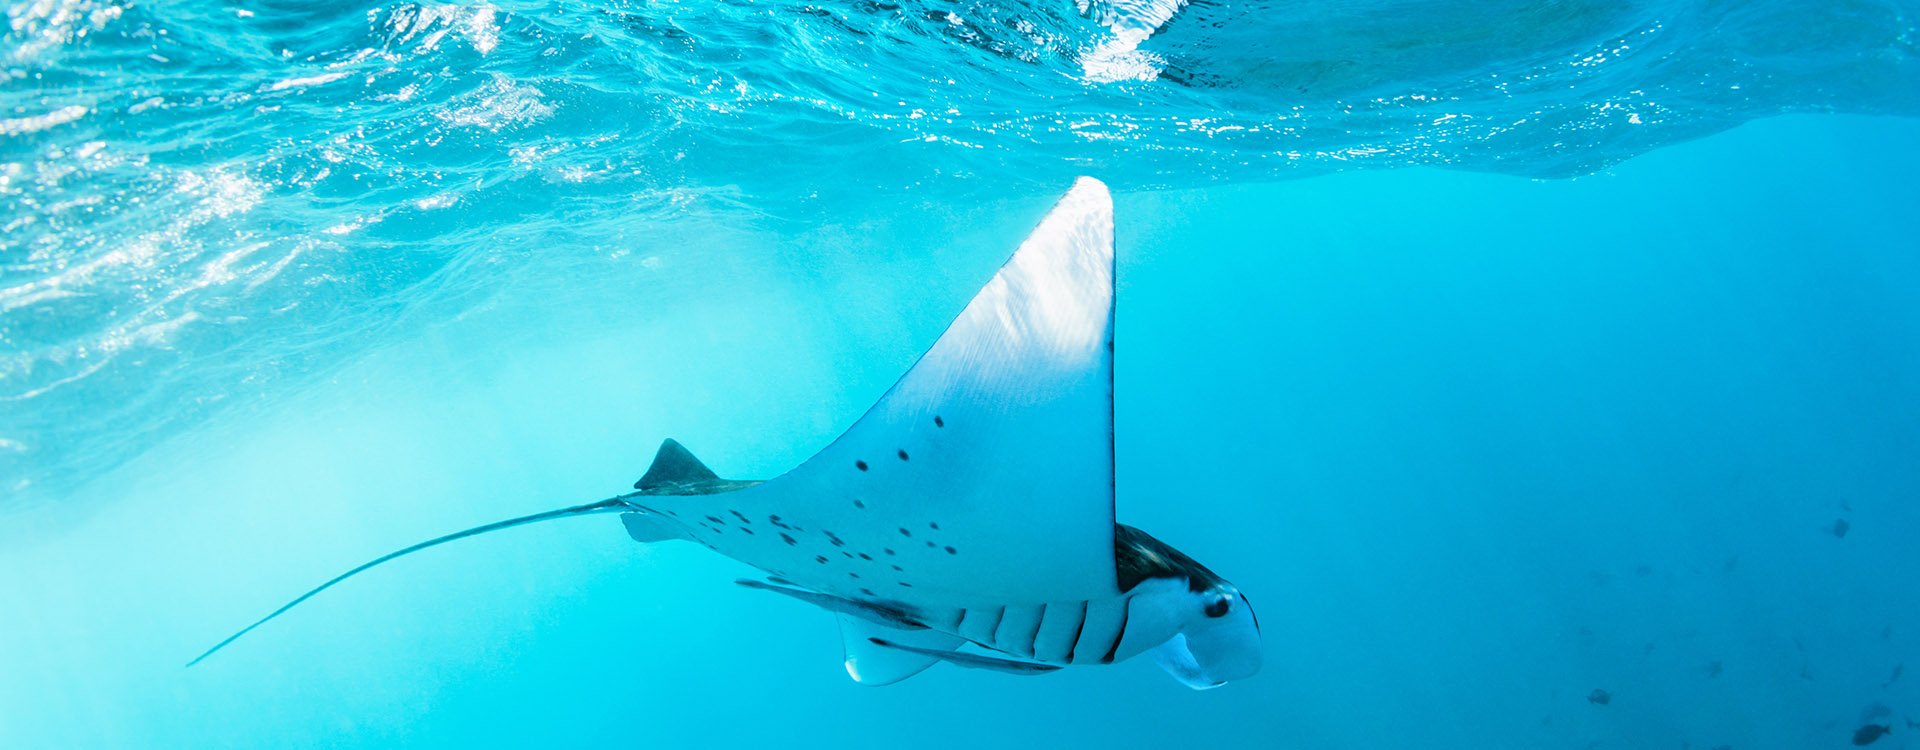 Underwater view of hovering giant oceanic manta ray